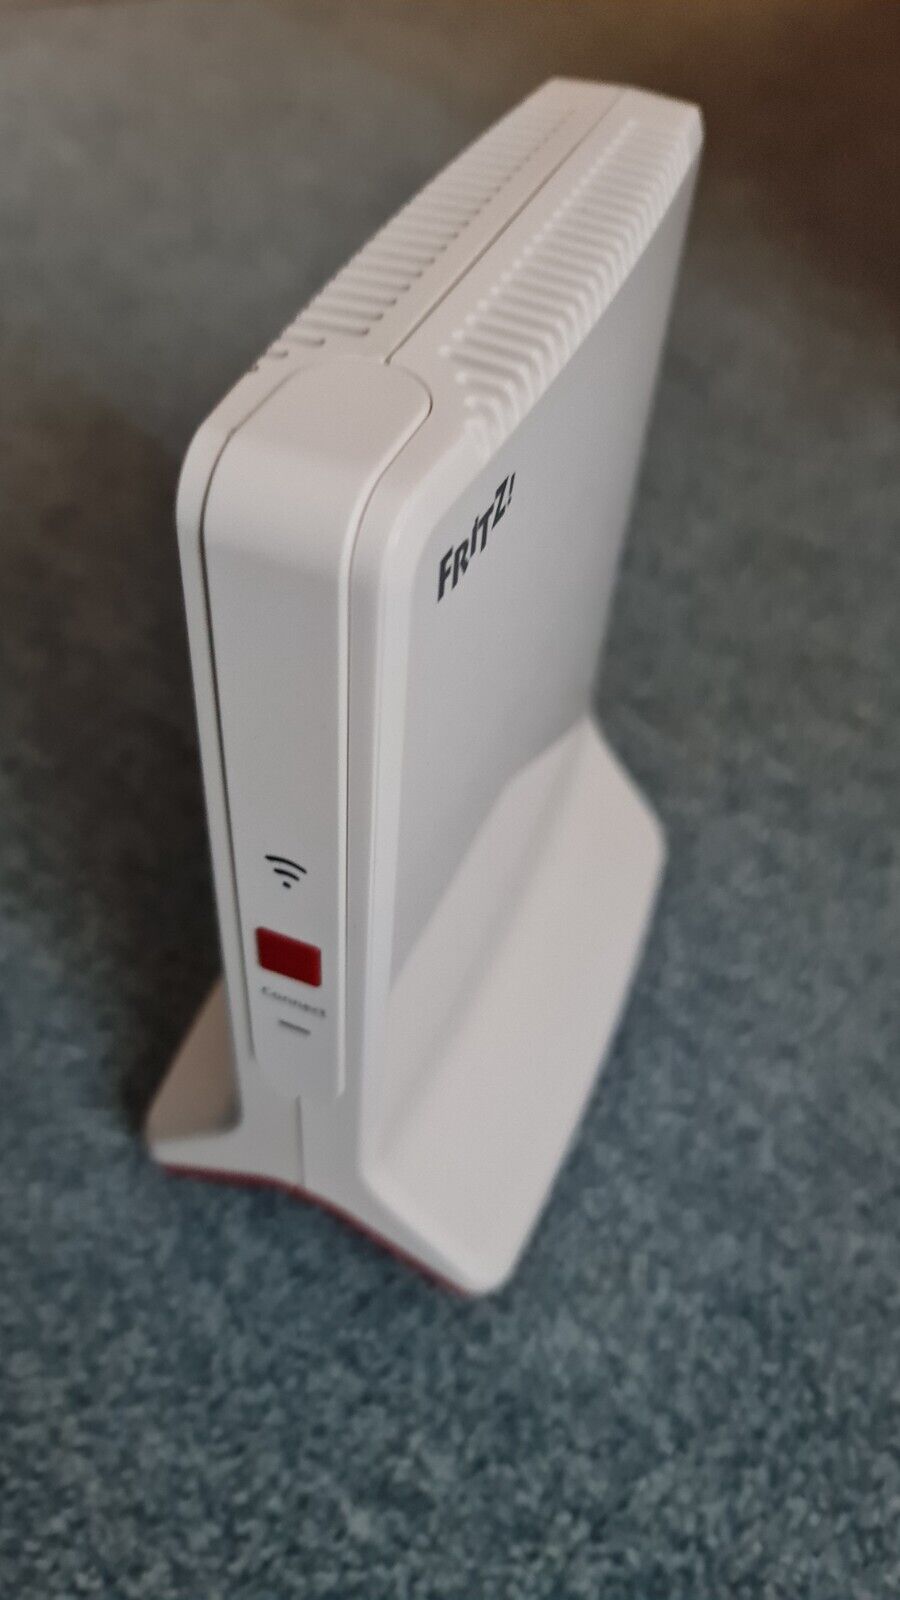 AVM FRITZ!Repeater 3000 WLAN Repeater 3000MBit/s 2.4GHz, 5GHz, Mesh-fähig